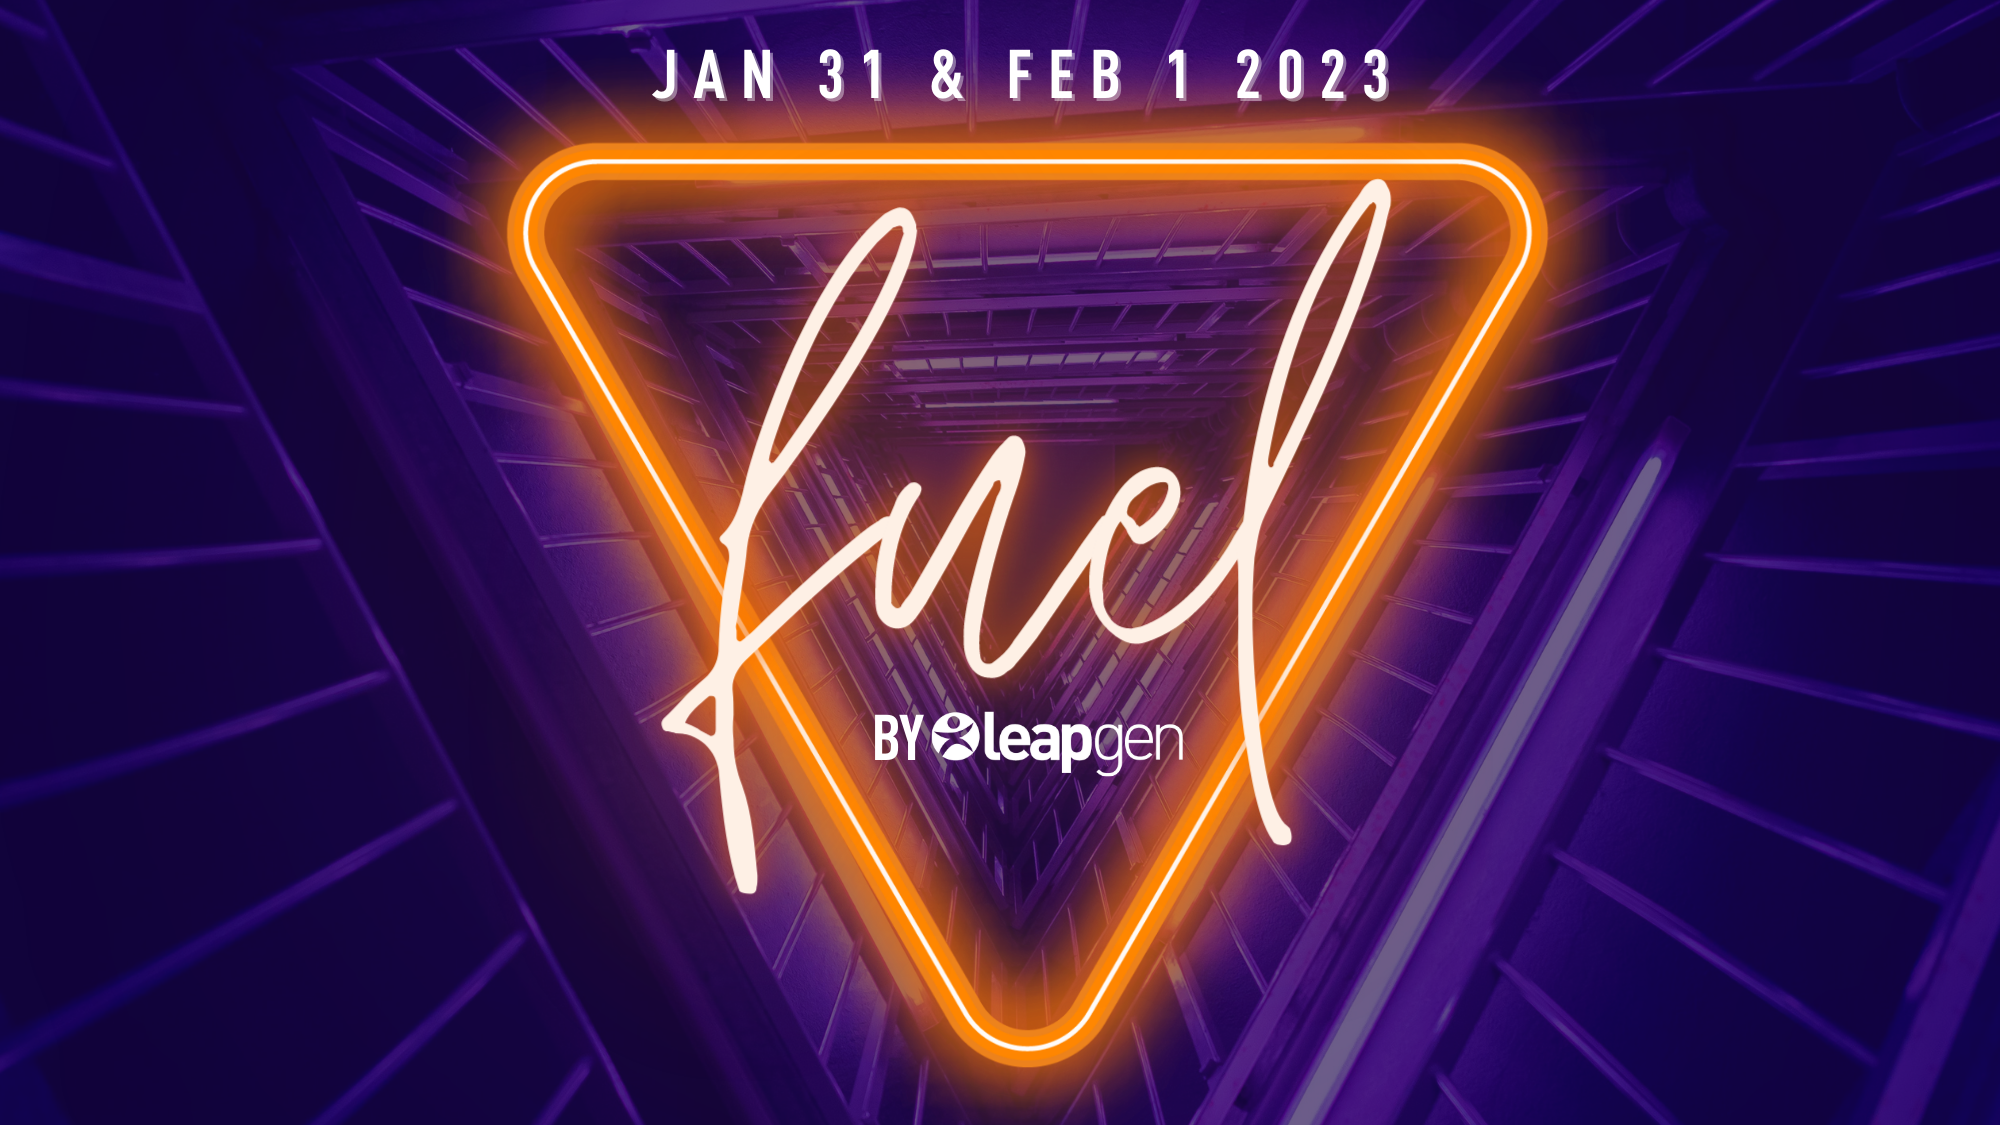 Leapgen Hosts Fuel: A 2023 Kickoff Event Designed to Help HR Leaders Make Functions More Digital in the Now of Work